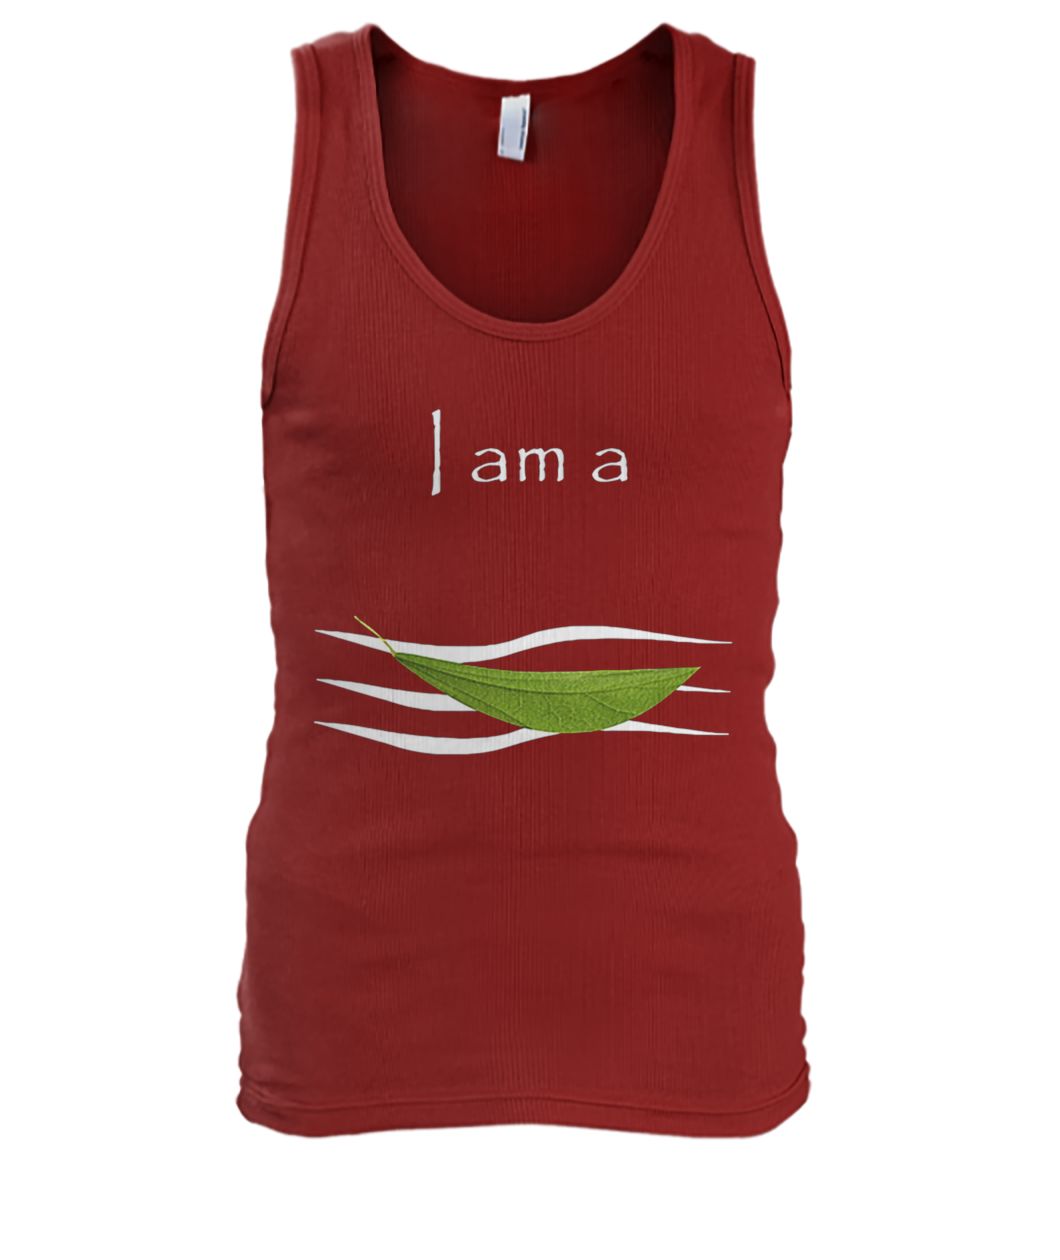 I am a leaf on the wind men's tank top